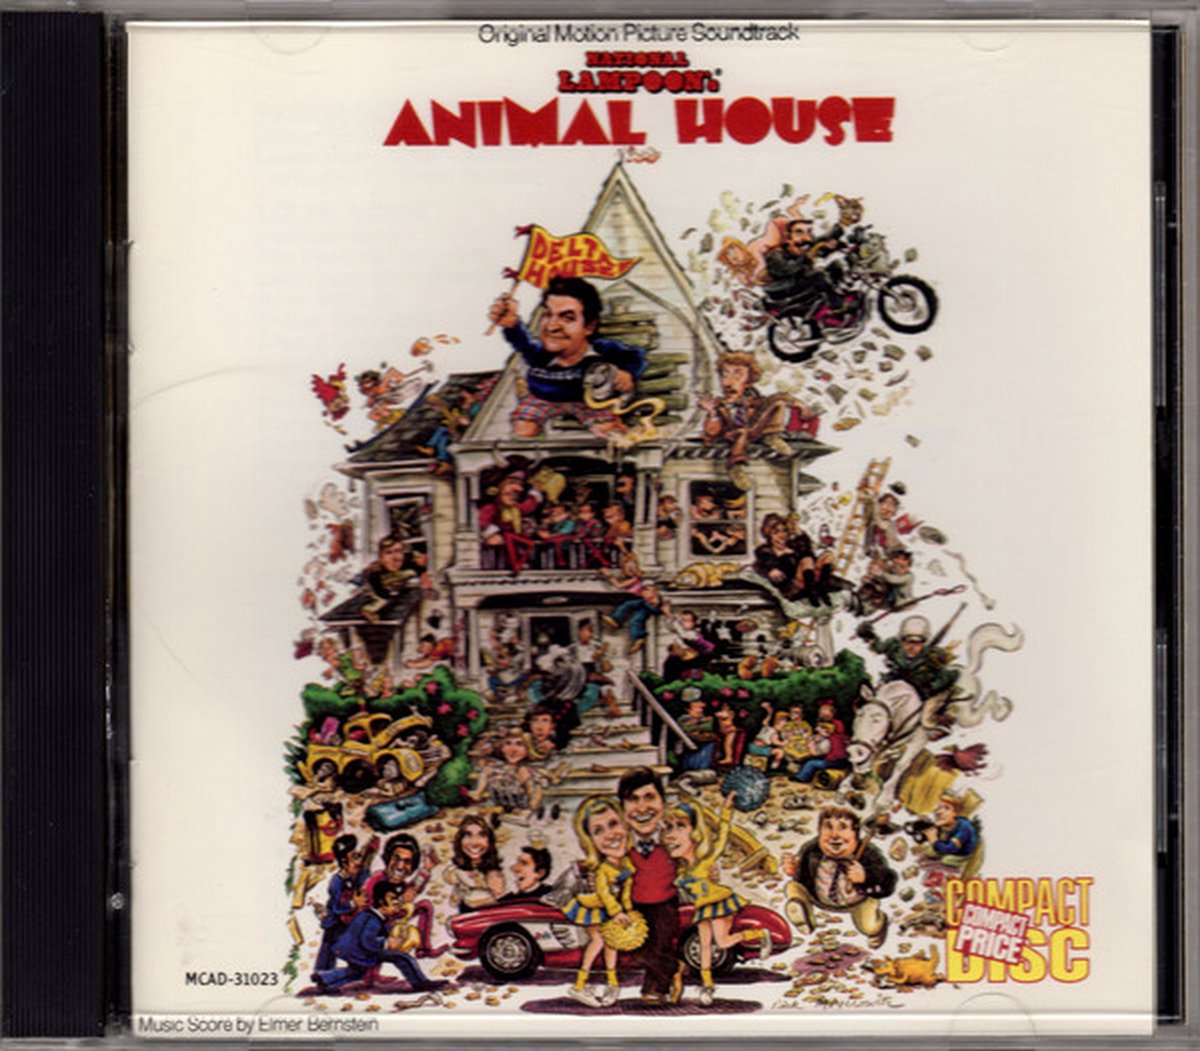 Animal House - various artists